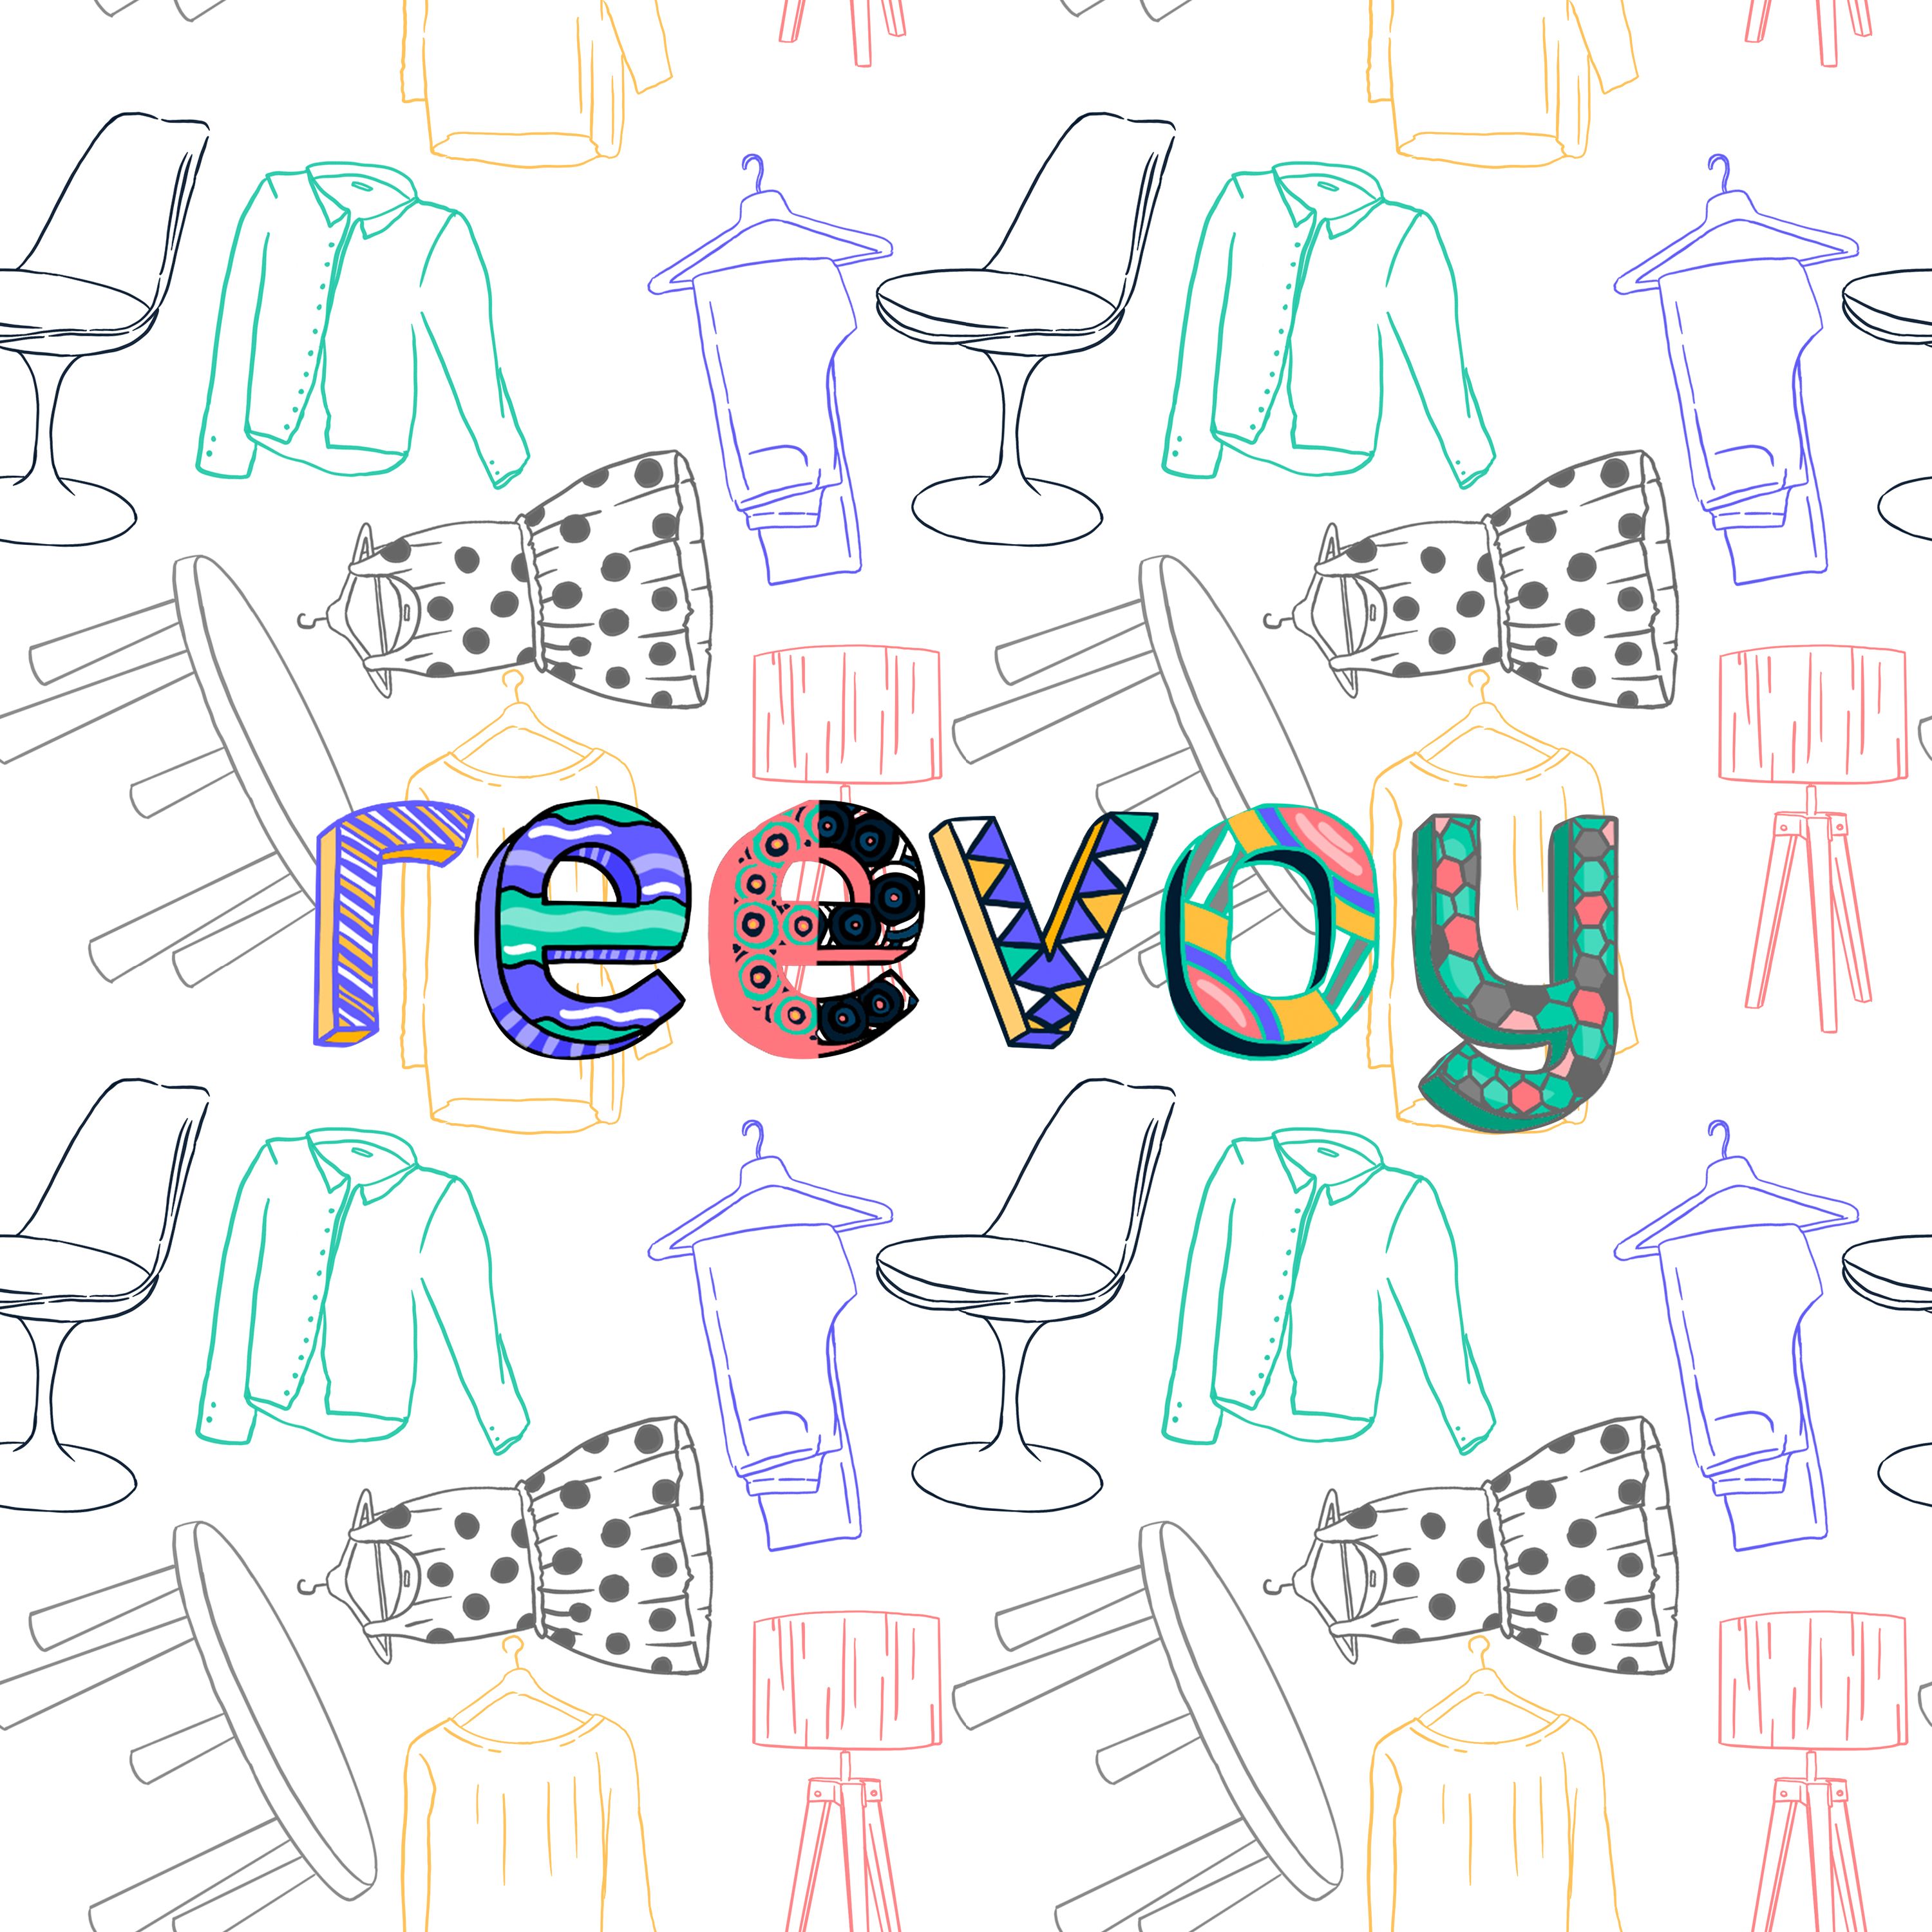 Reevoy- Sourcing simplified